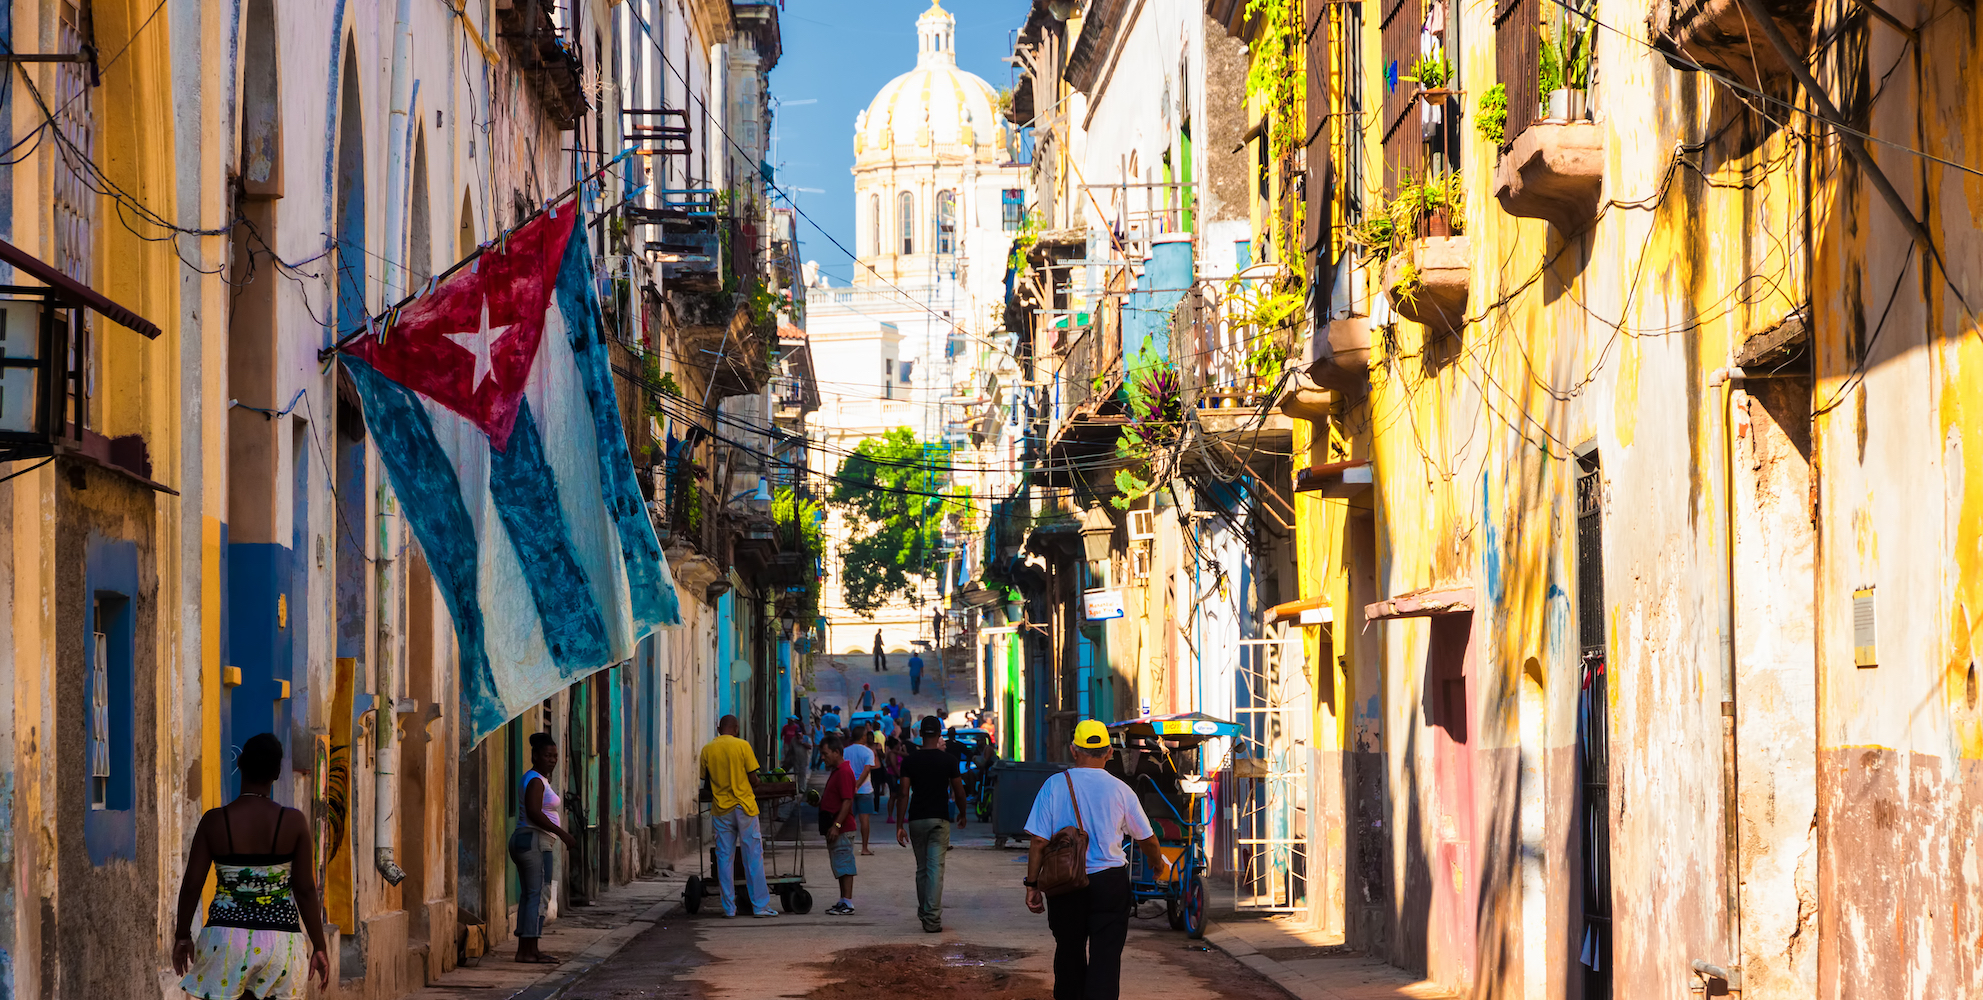 Small street view of colorful buildings and doorways while people walk the road down the middle in Cuba